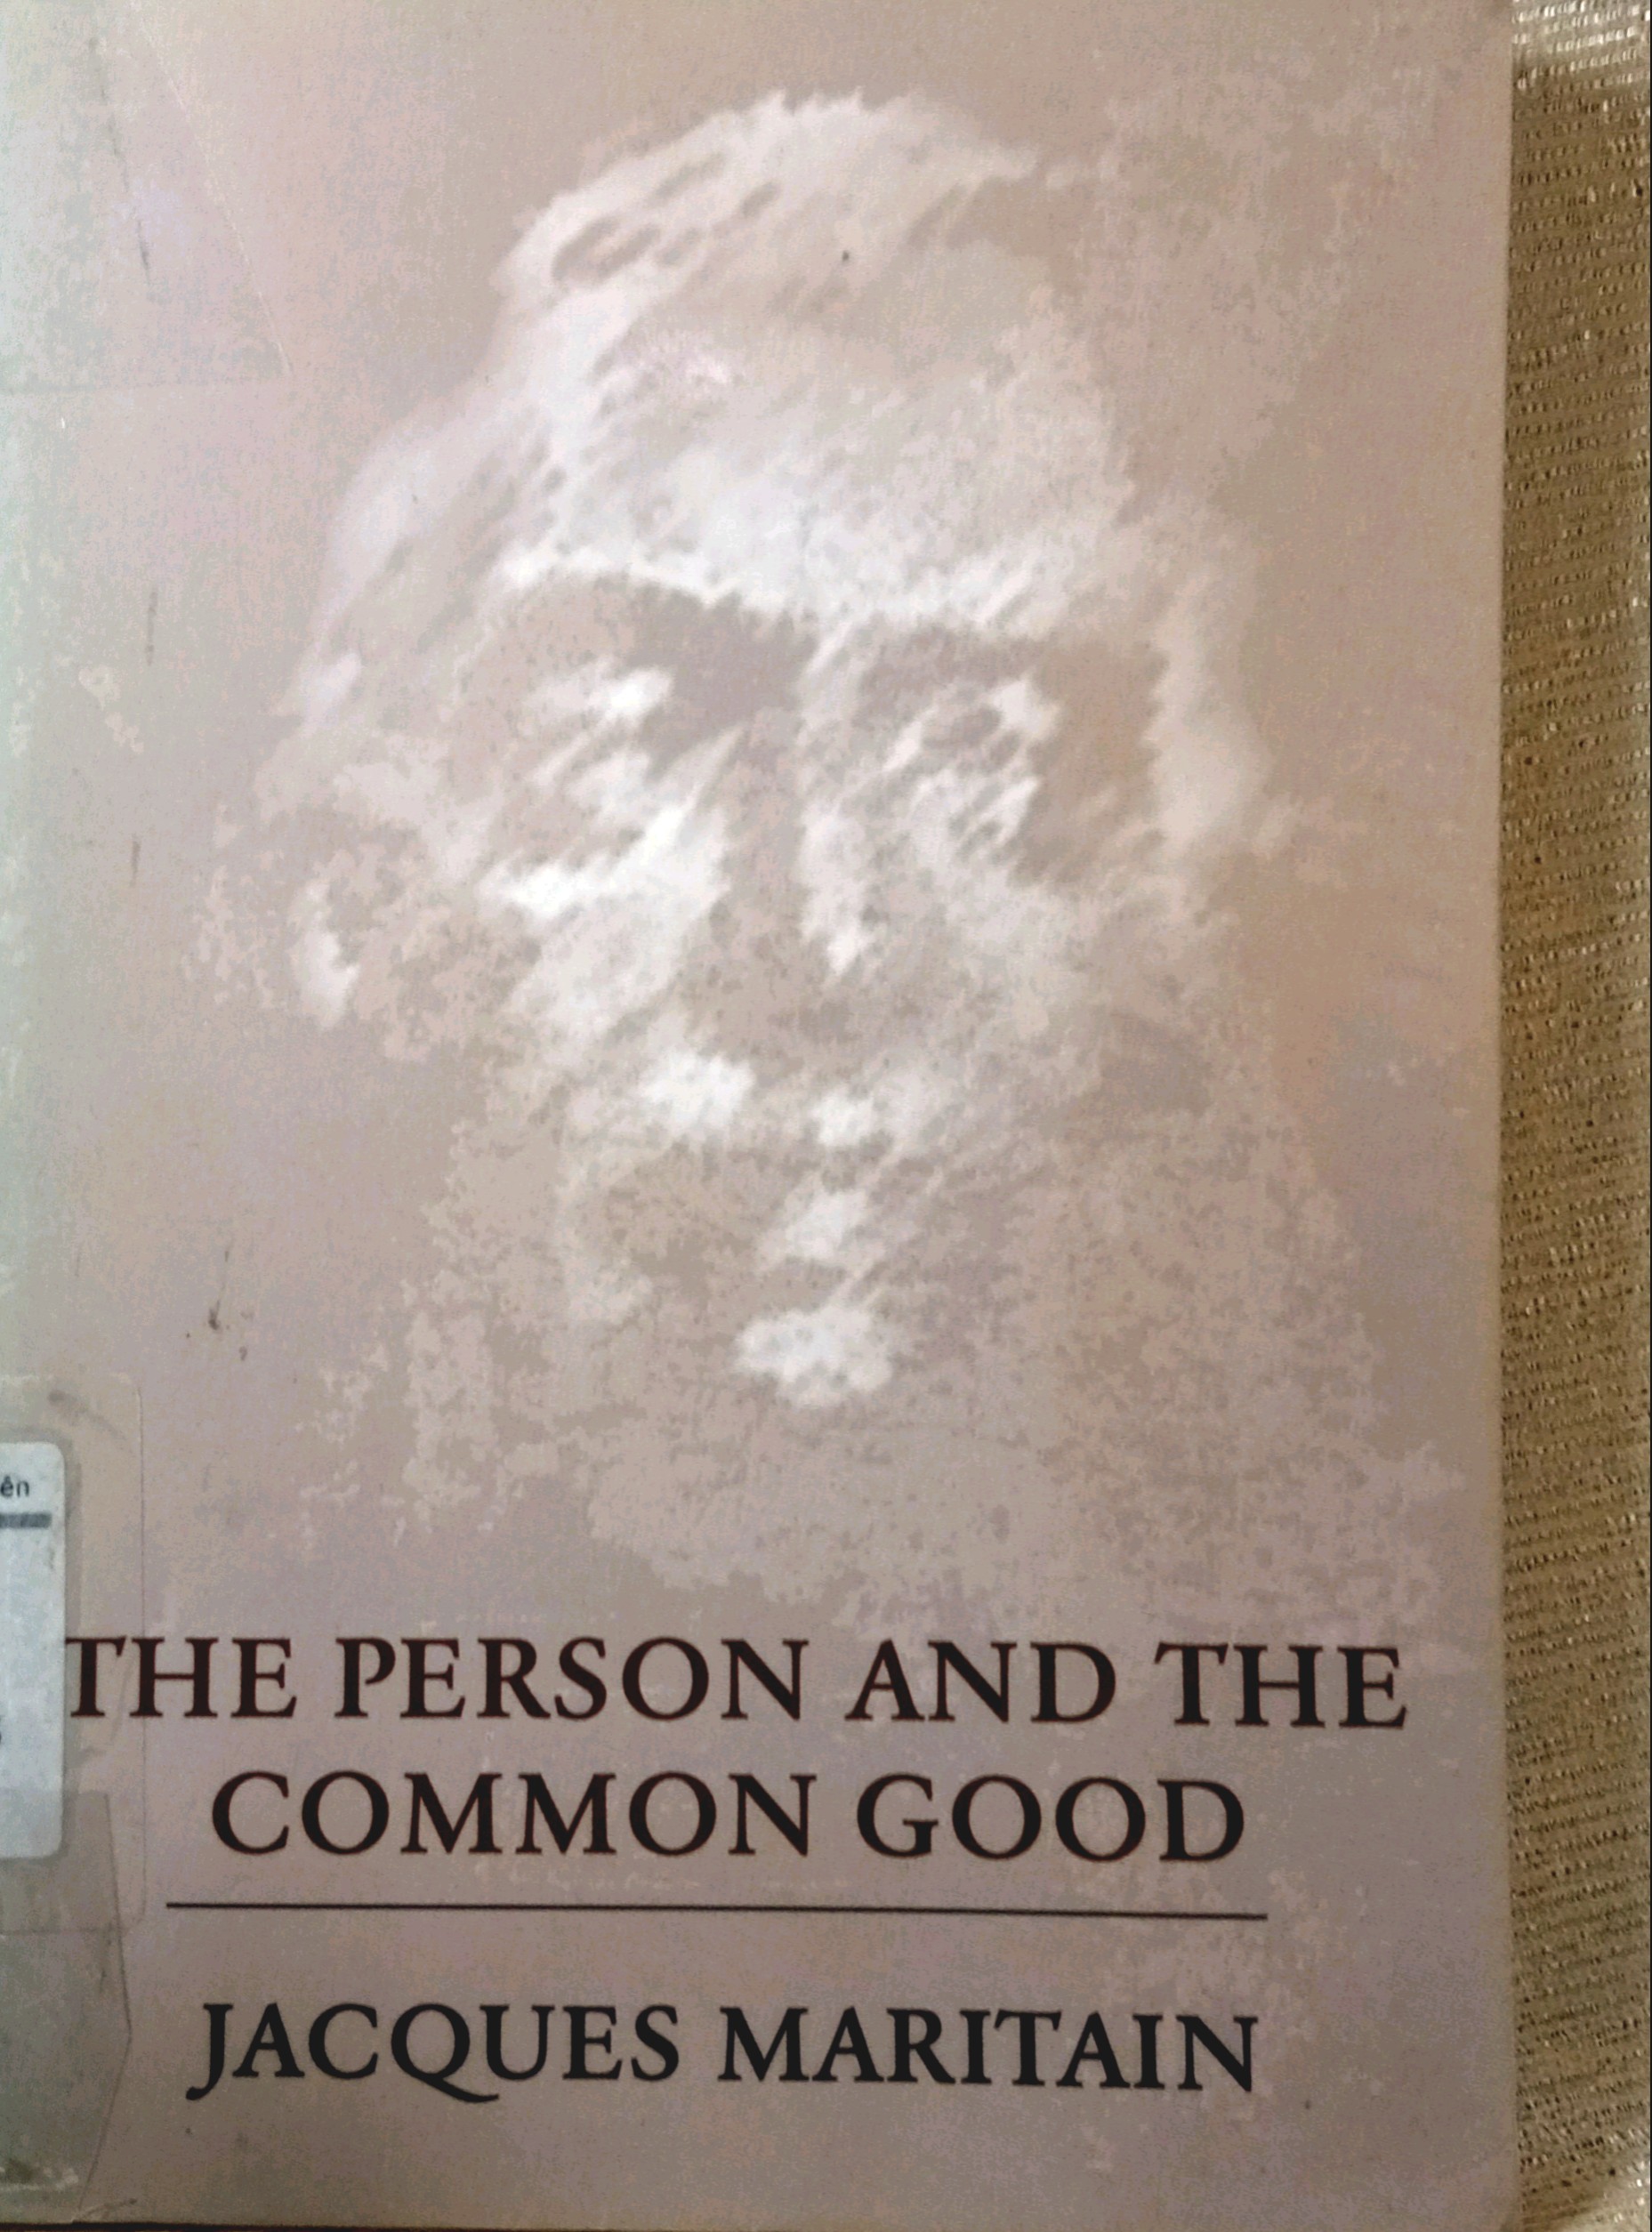 THE PERSON AND THE COMMON GOOD